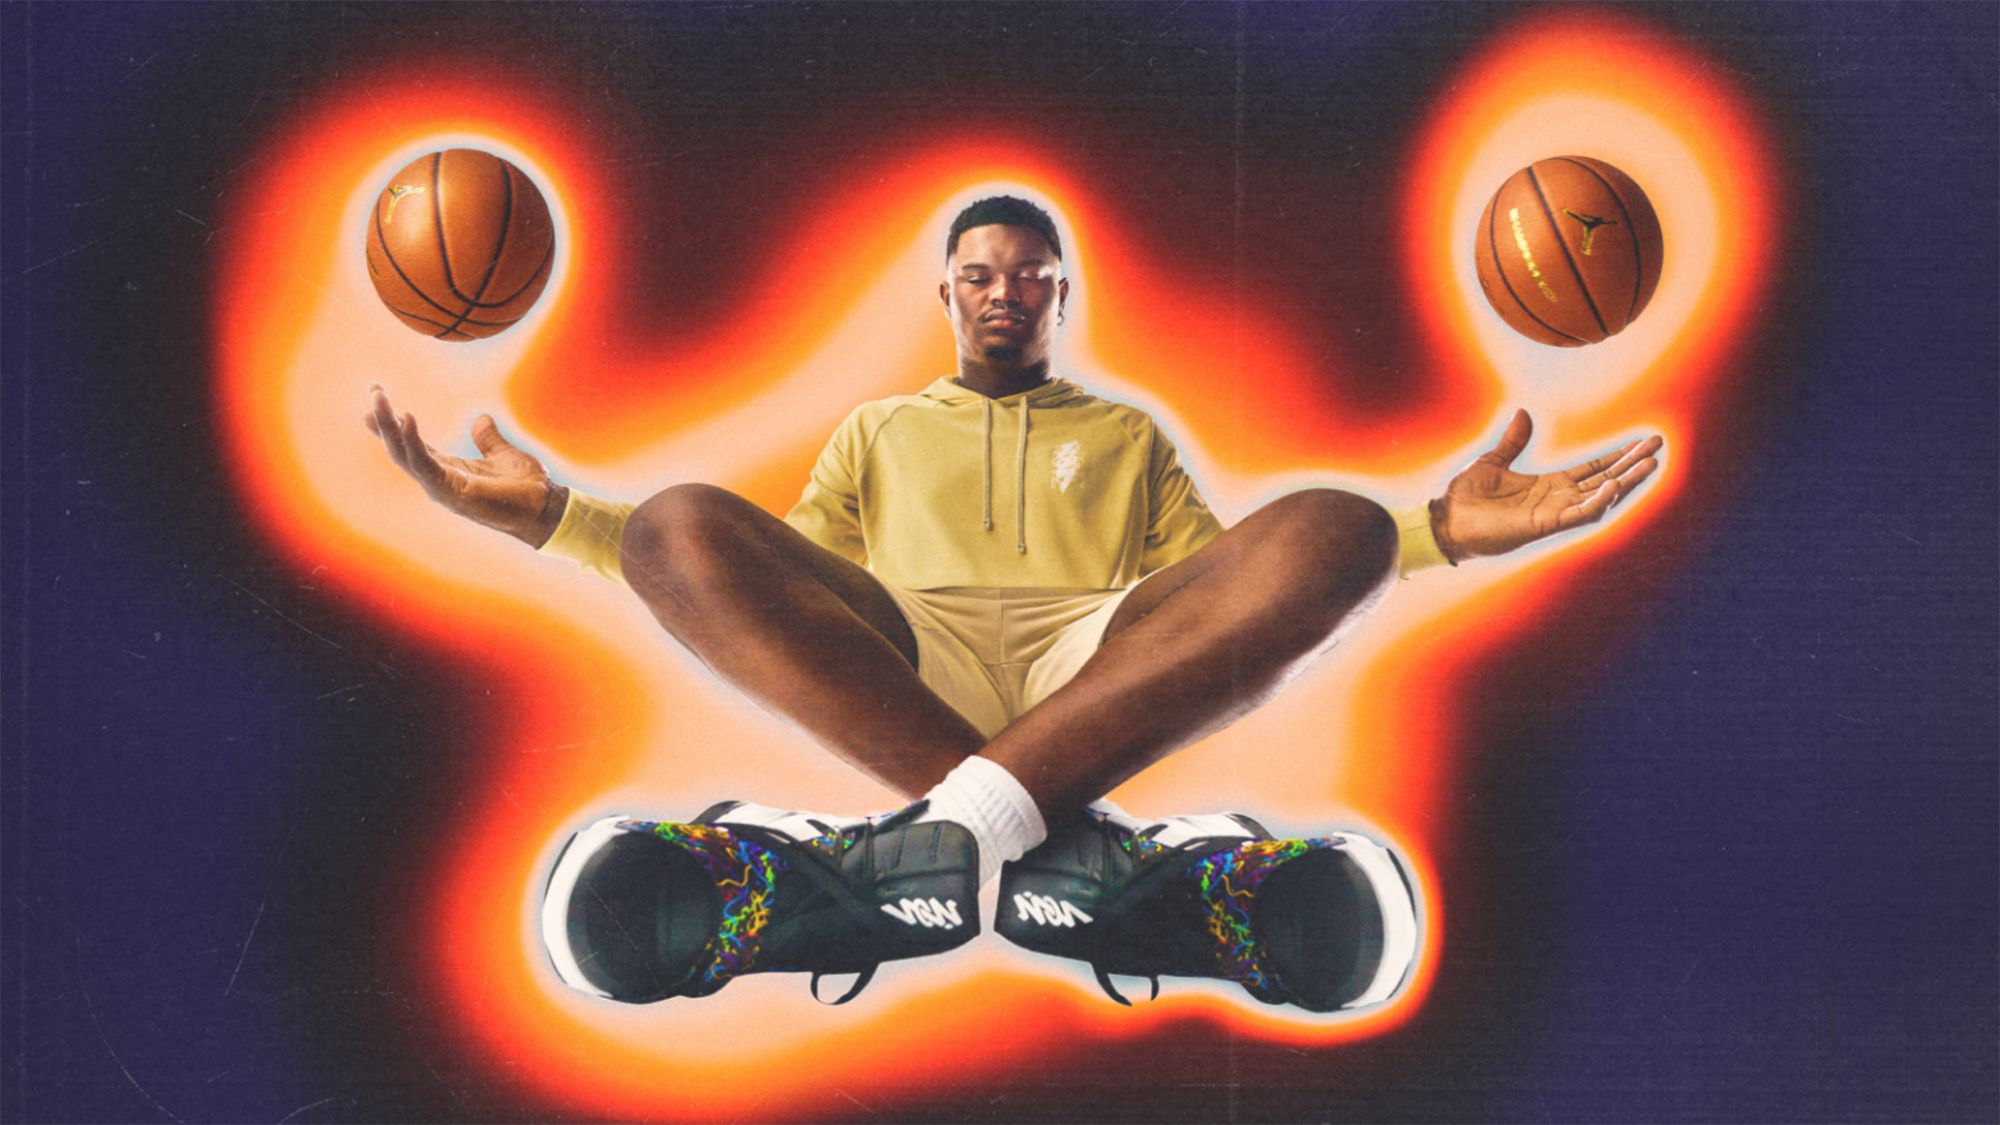 Zion Williamson sitting crosslegged holding to floating basketballs. He is surrounded by an orange and red glow with purple background